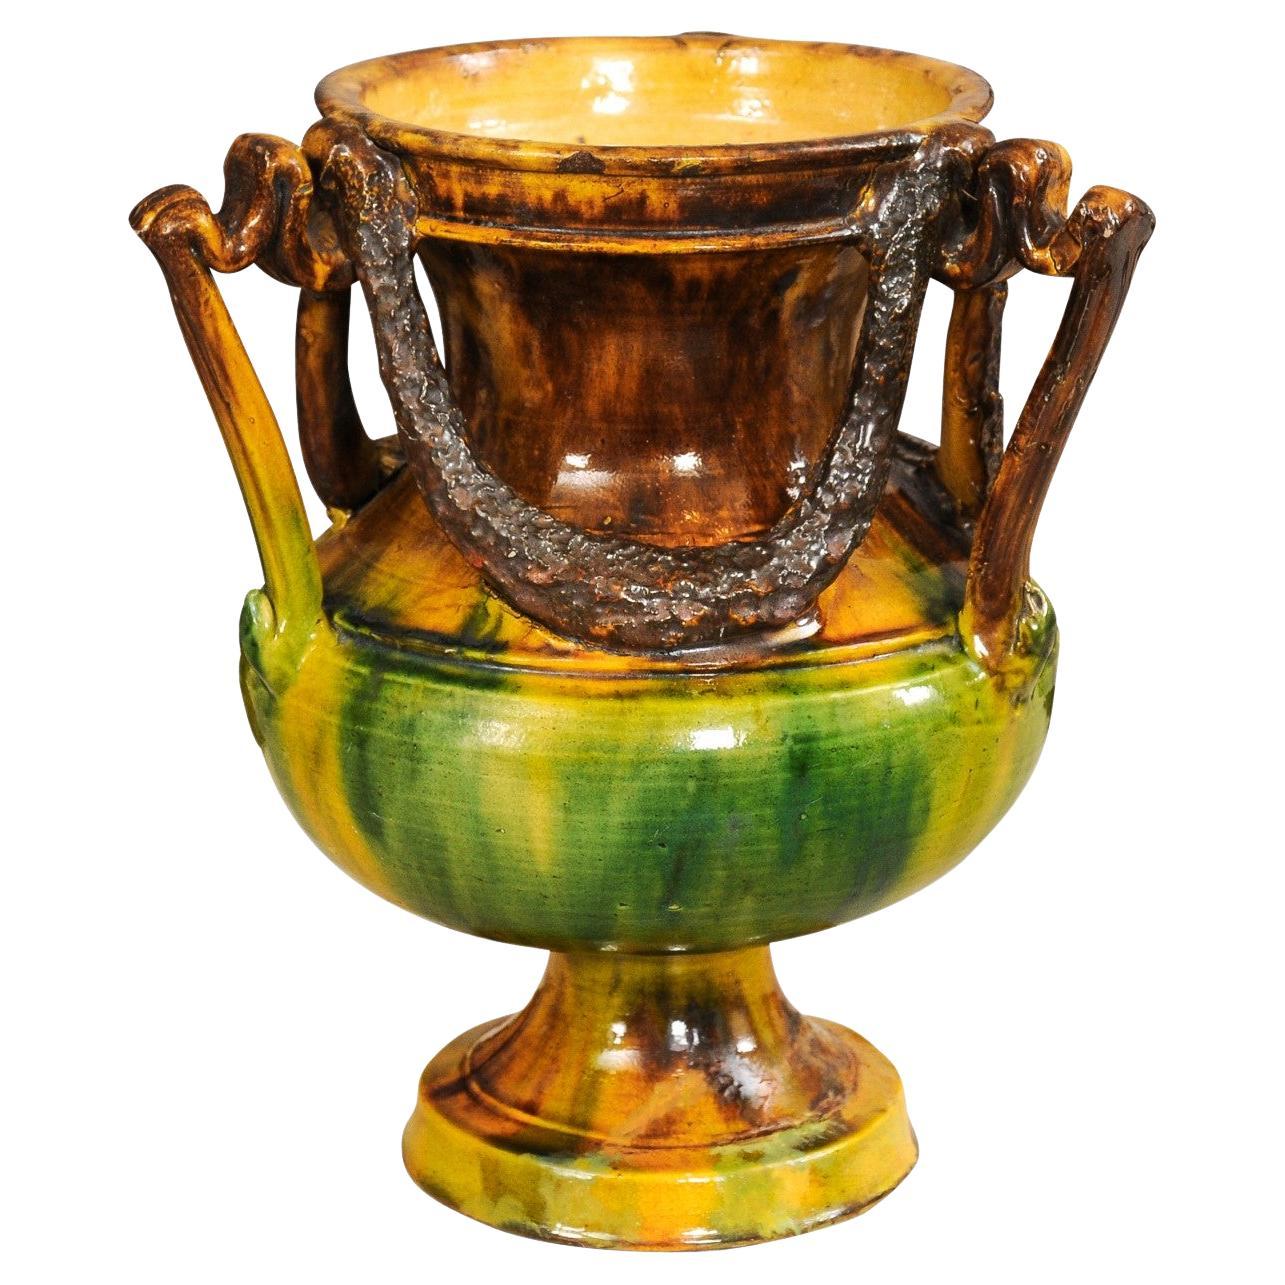 French Classical 19th Century Anduze Multi-Colored Glazed Vase with Swag Motifs For Sale